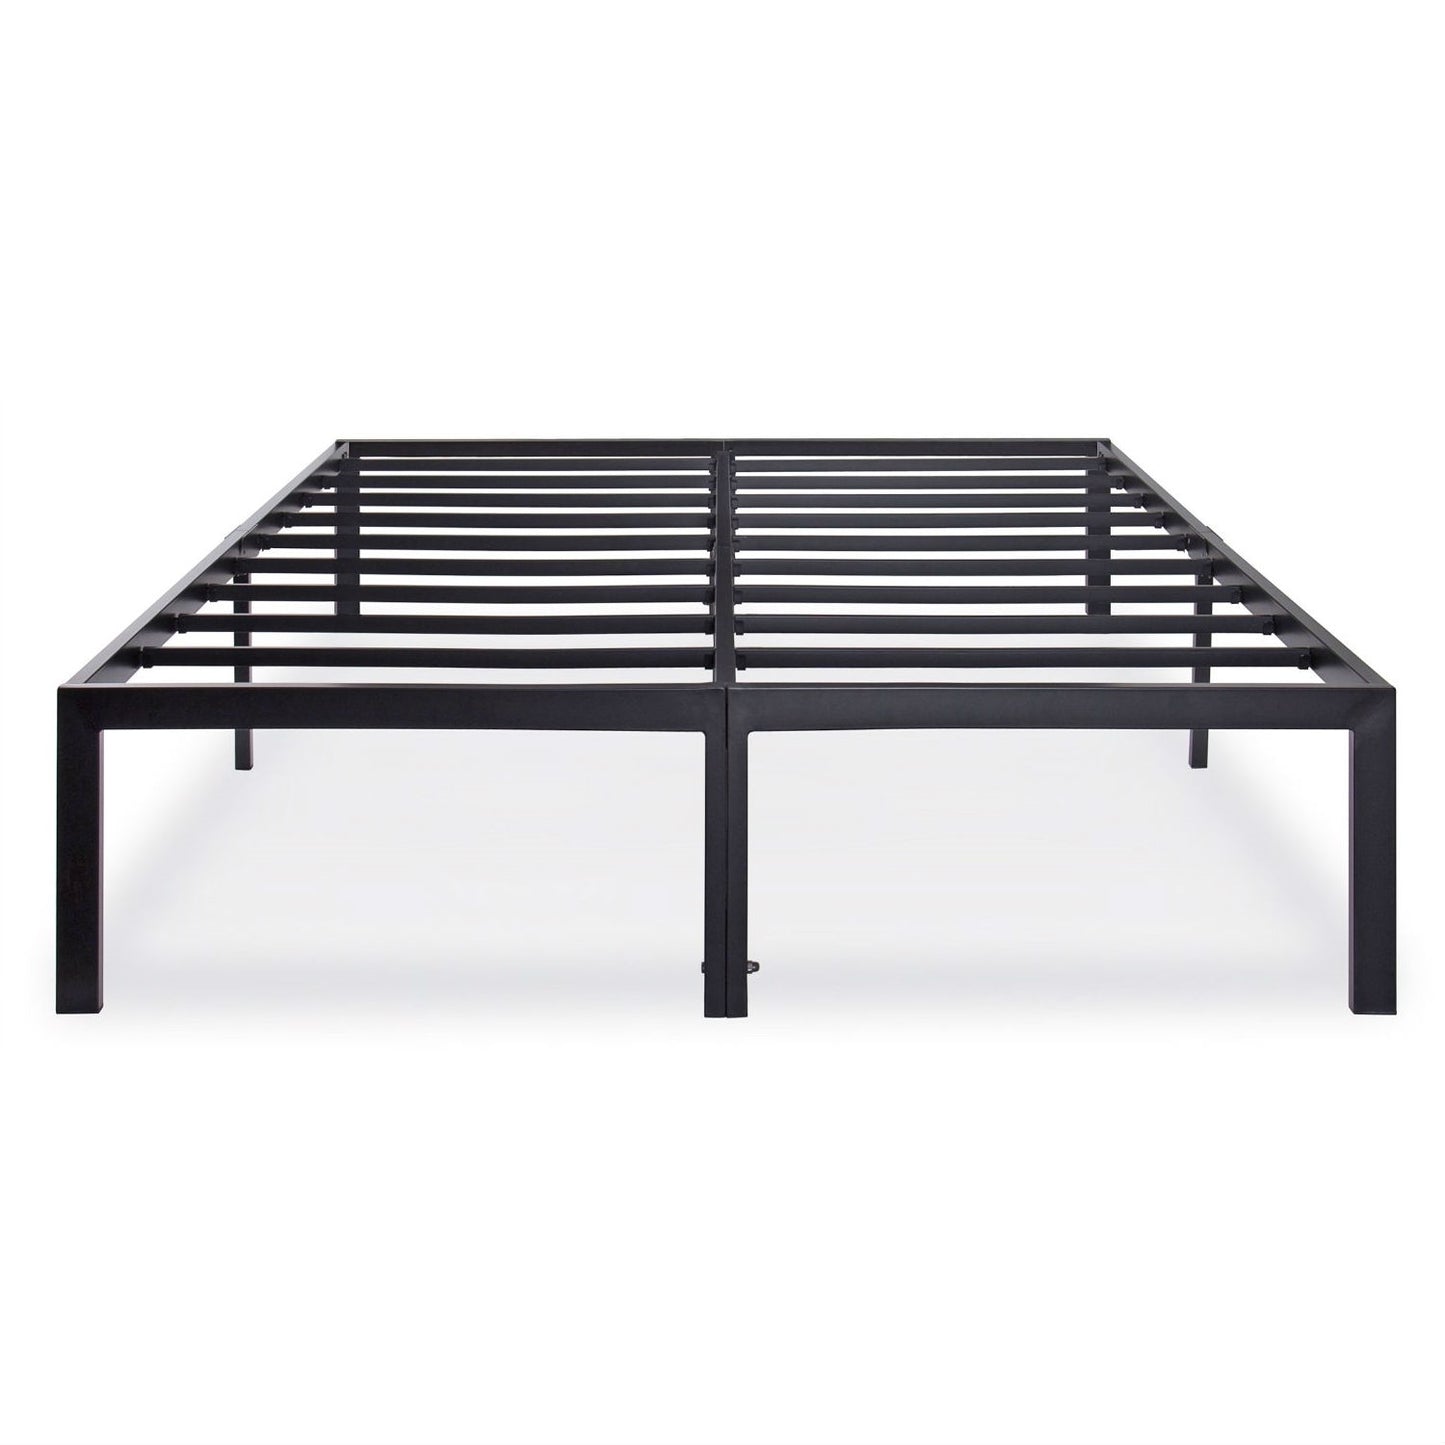 King size Sturdy Metal Platform Bed Frame - Holds up to 2,200 lbs